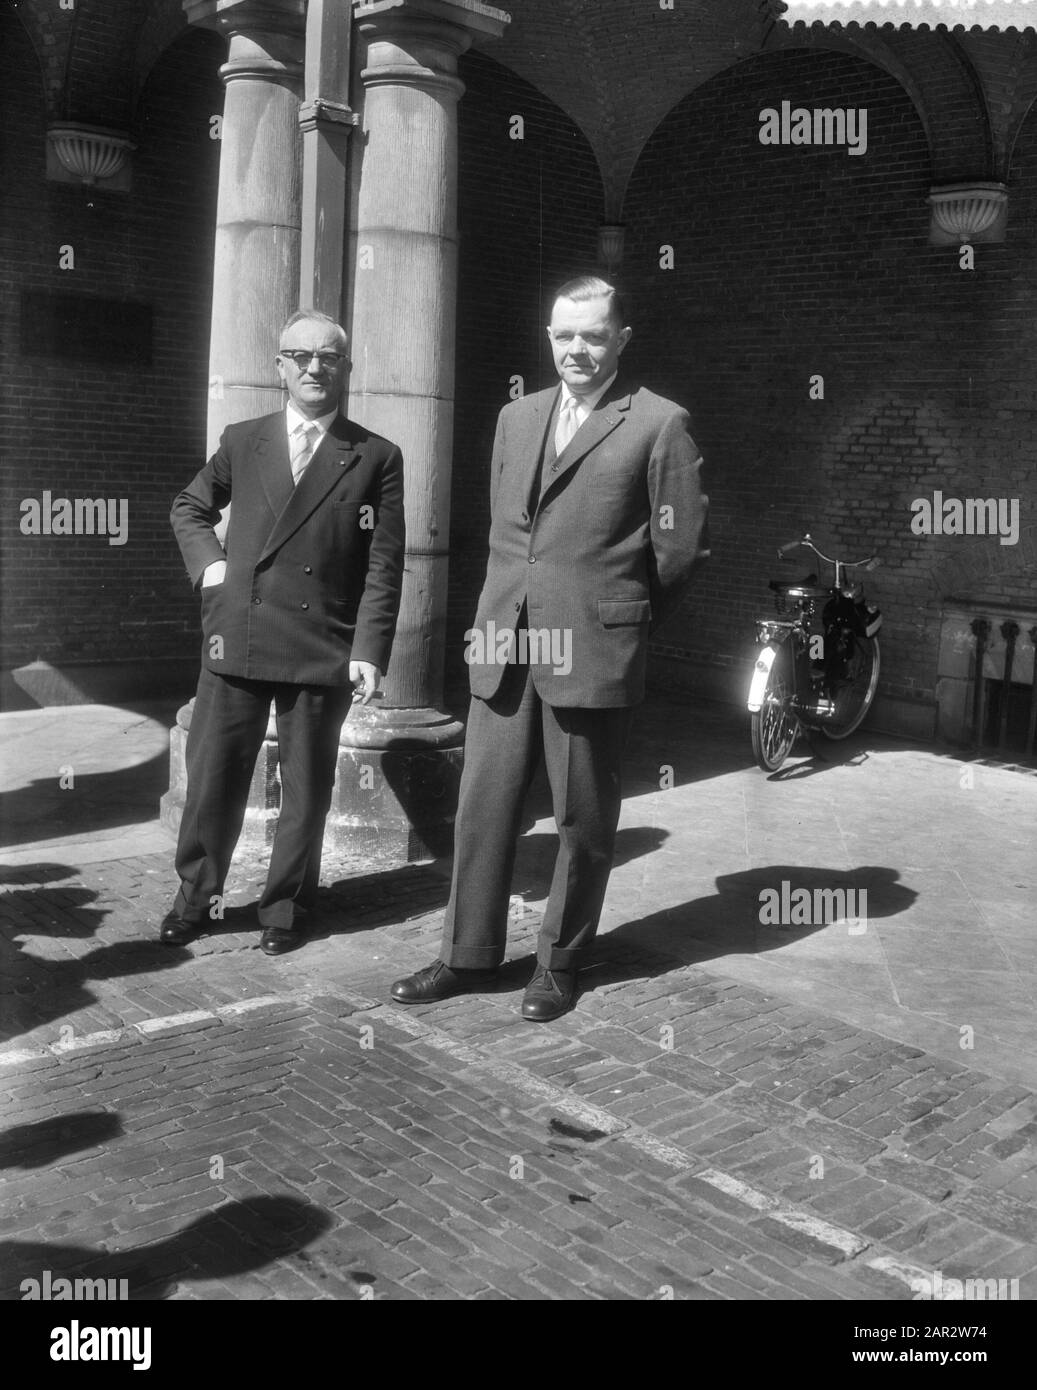 Professor De Quay receives the chairman of the CNV Mr. C. J. Van Mastrigt (left) and the chairman of the CHU mr. H. K. J. Beernink Date: April 20, 1959 Stock Photo